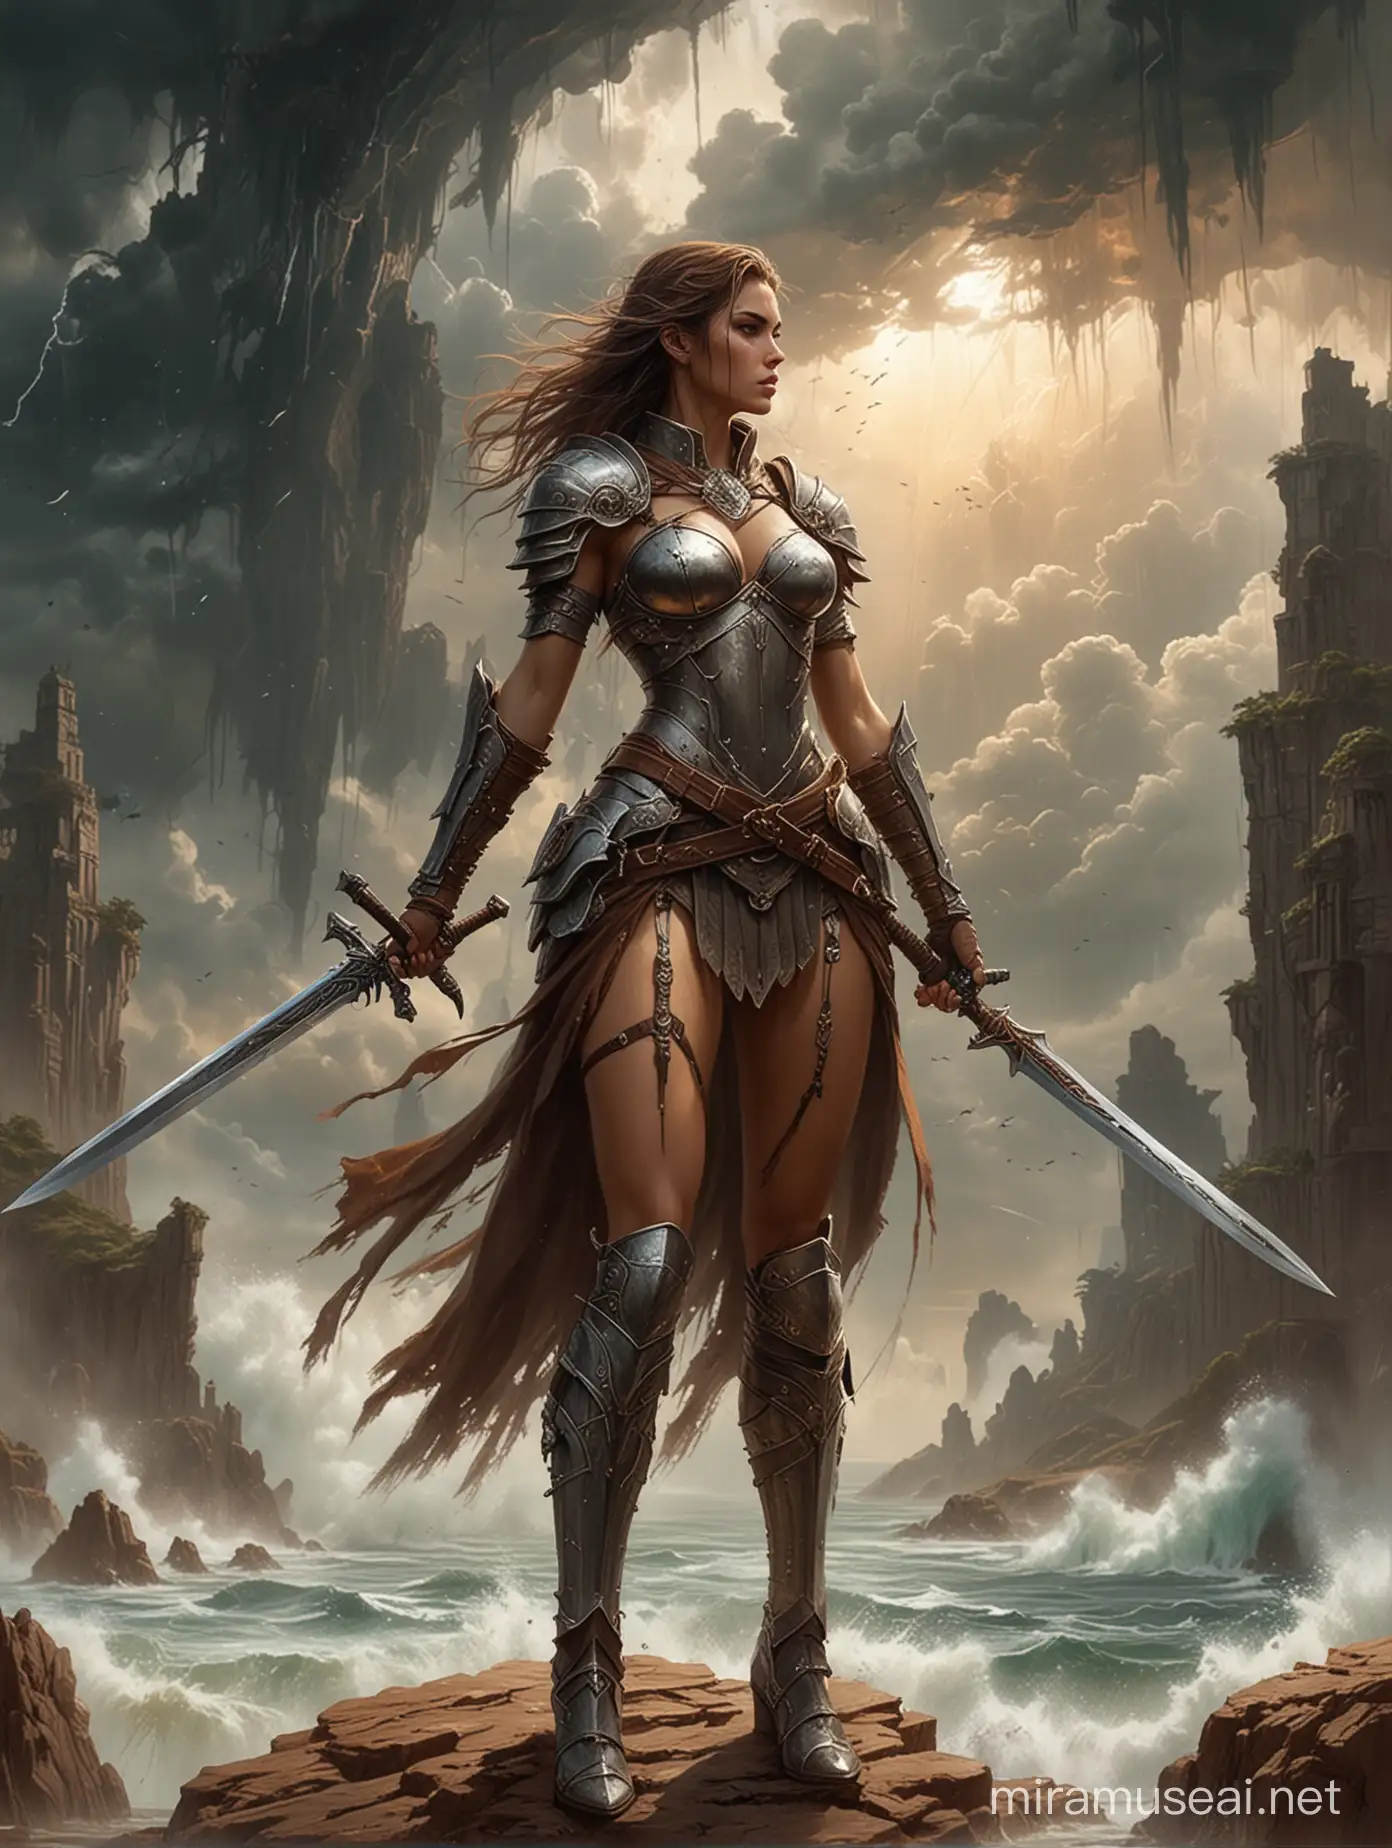 painting of A woman in armor, standing widely, holding a sword high above her head, surrounded by swirling storms and floating islands. Style of Luis Royo inspired fantasy female warrior art. black, tan, wheat, rosybrown colors. 8K HD.